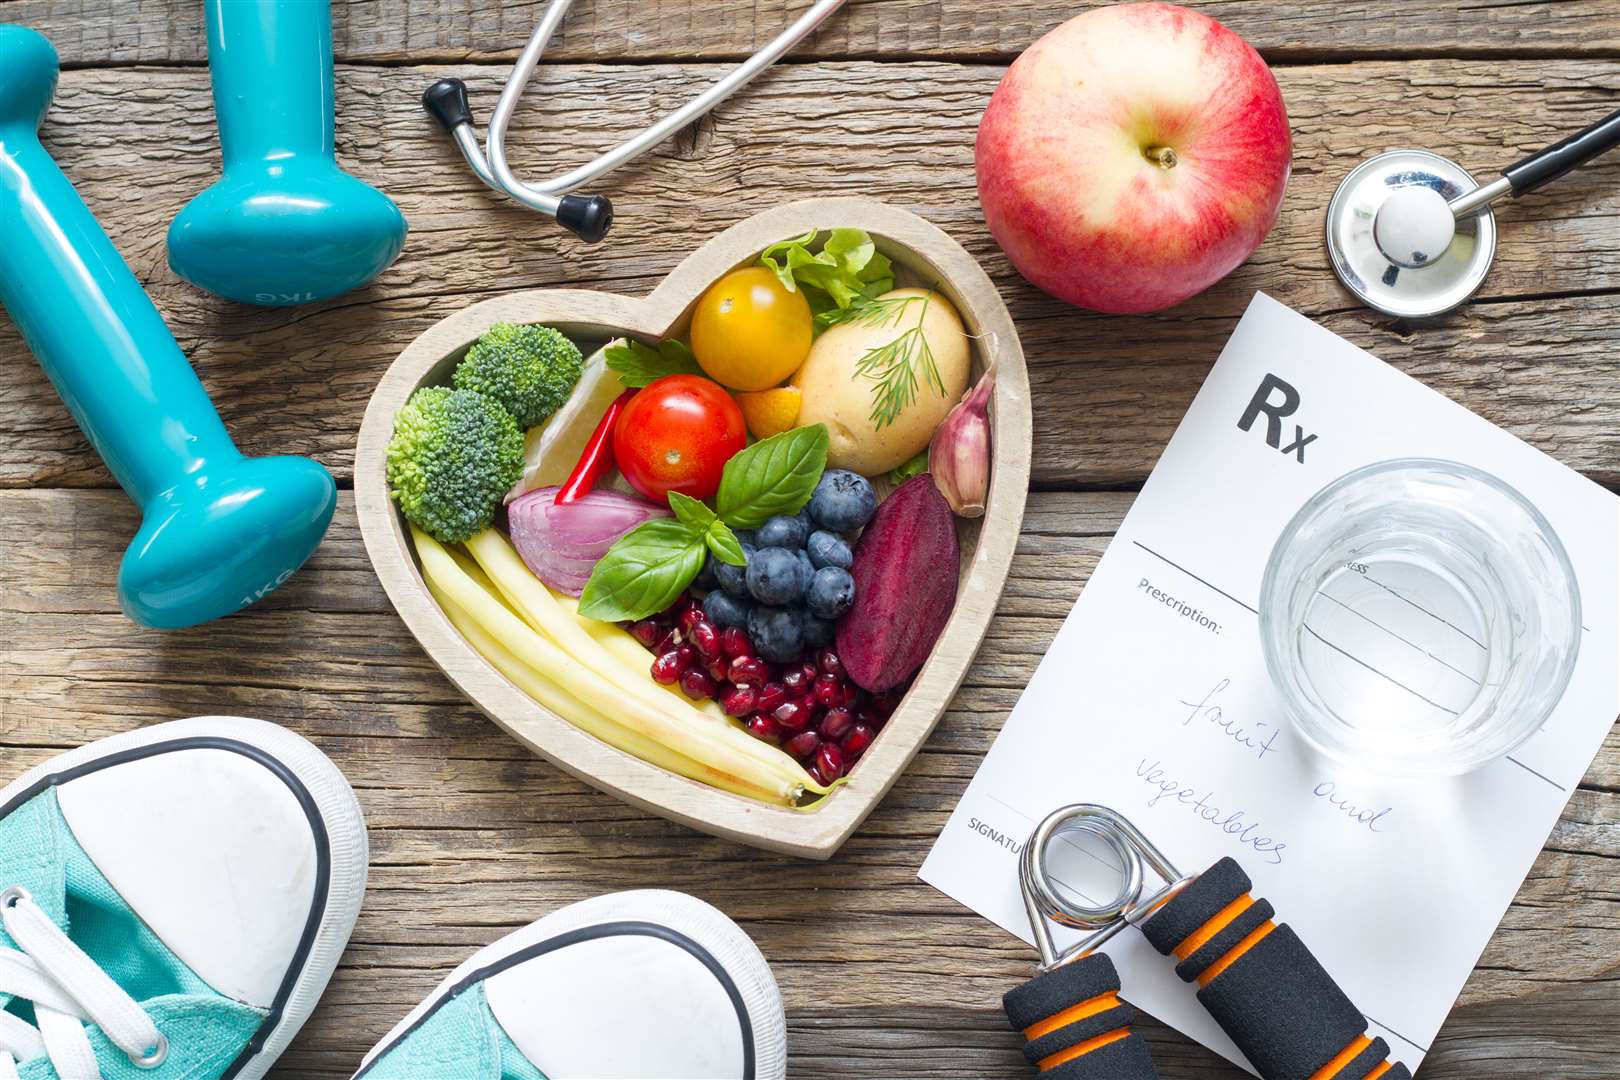 Medication should be just one element of a healthy lifestyle – and is not always the right answer.